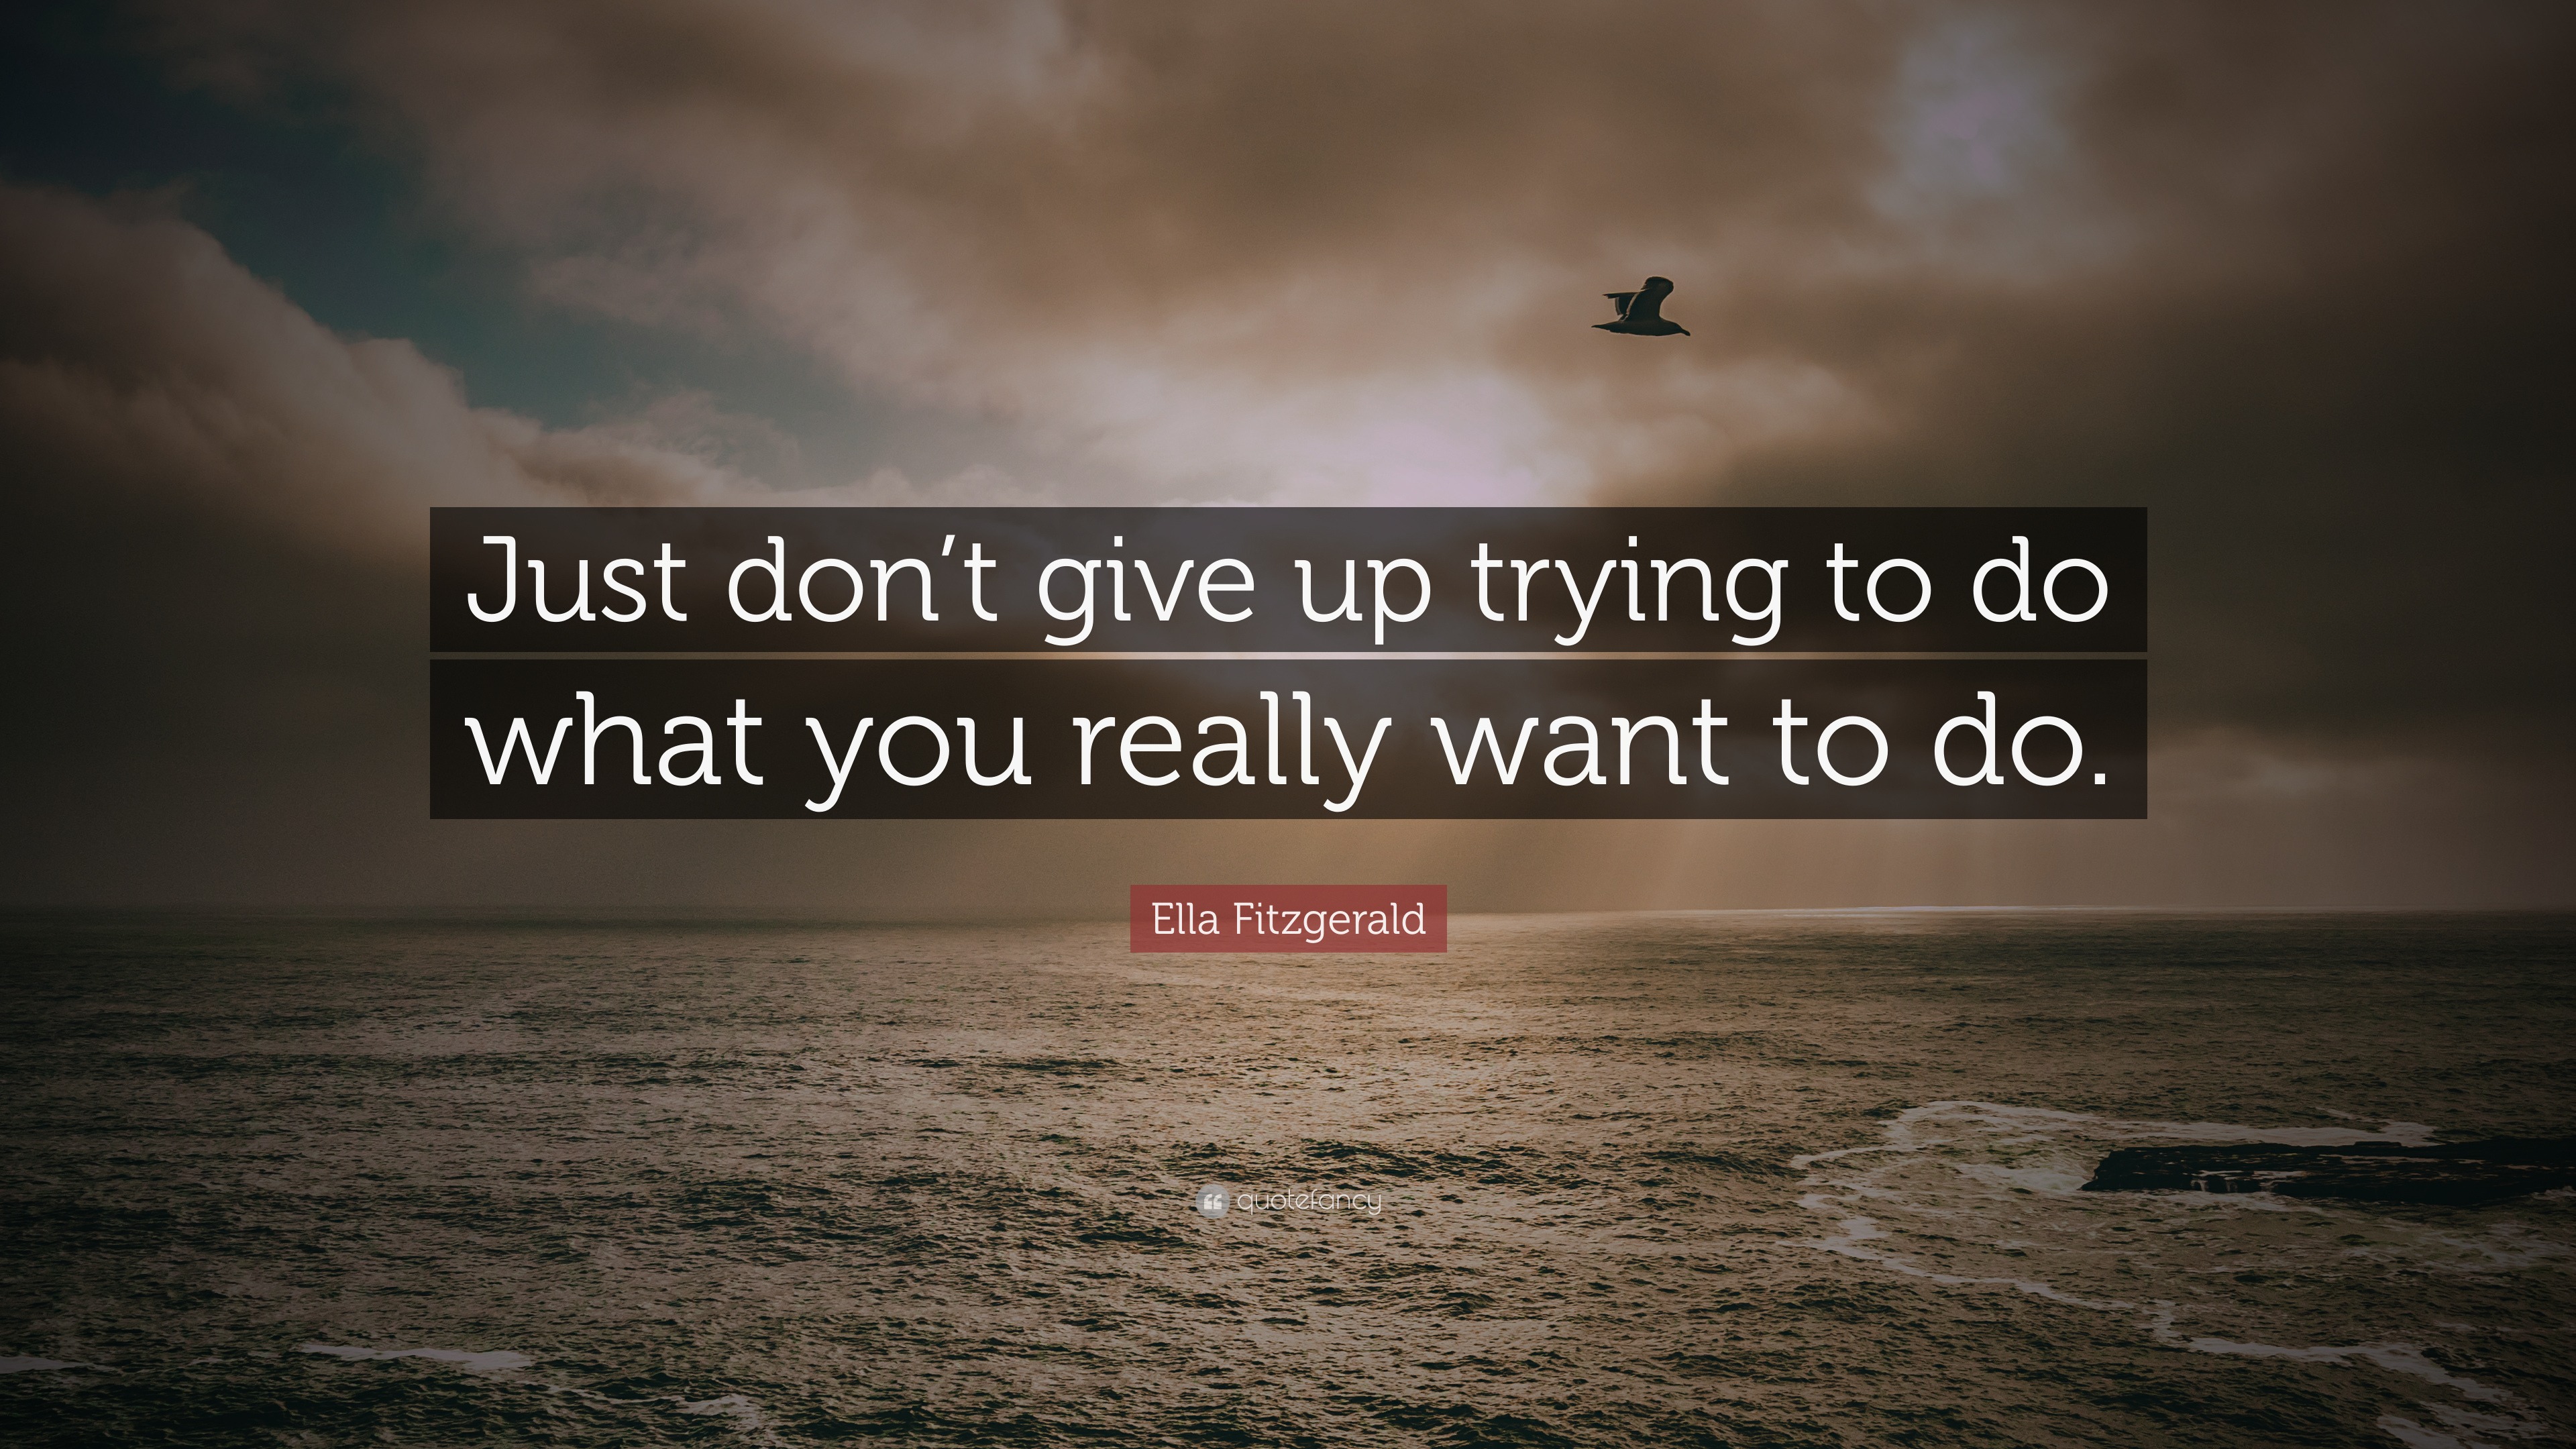 Ella Fitzgerald Quote: “Just don’t give up trying to do what you really ...